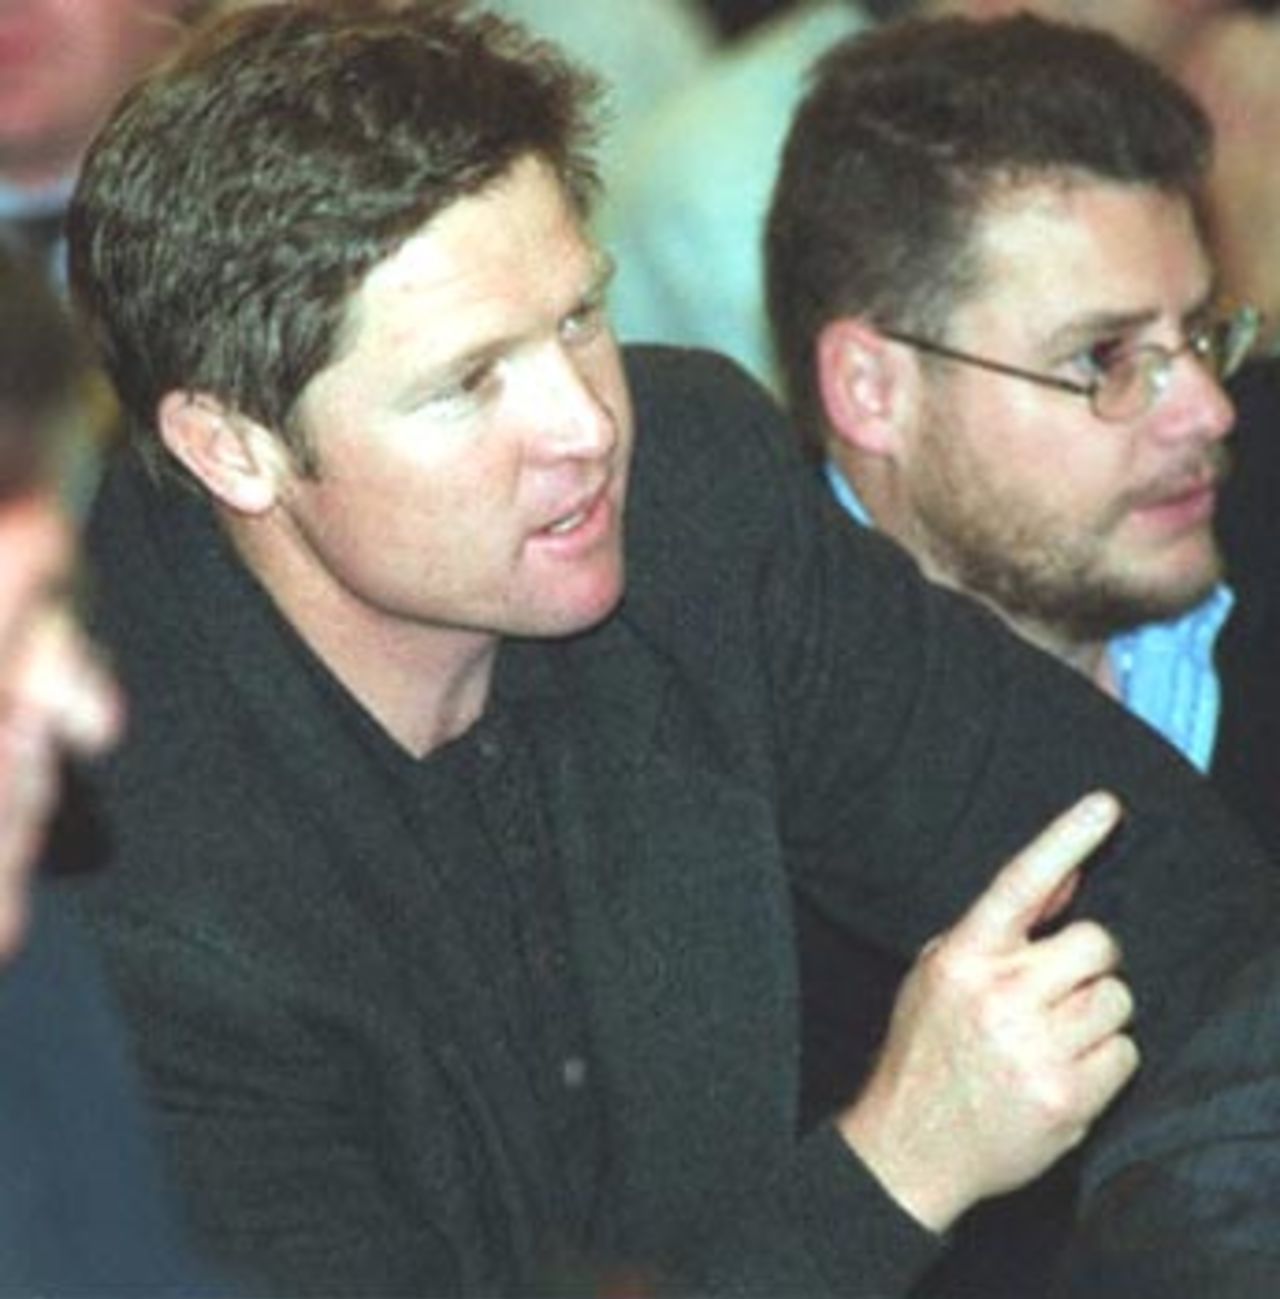 Well known South African batsman and national team member, Daryll Cullinan, 07 June 2000 at the first sitting of the King Commission, which is investigating irregularities in South African cricket, in particular accusations of match fixing and accepting bribes. South African cricket captain, Hansie Cronje, who admitted to receiving money from an Idian bookmaker, is one of 49 witnesses that will be called to testify before the commission, which is being held in Cape Town.